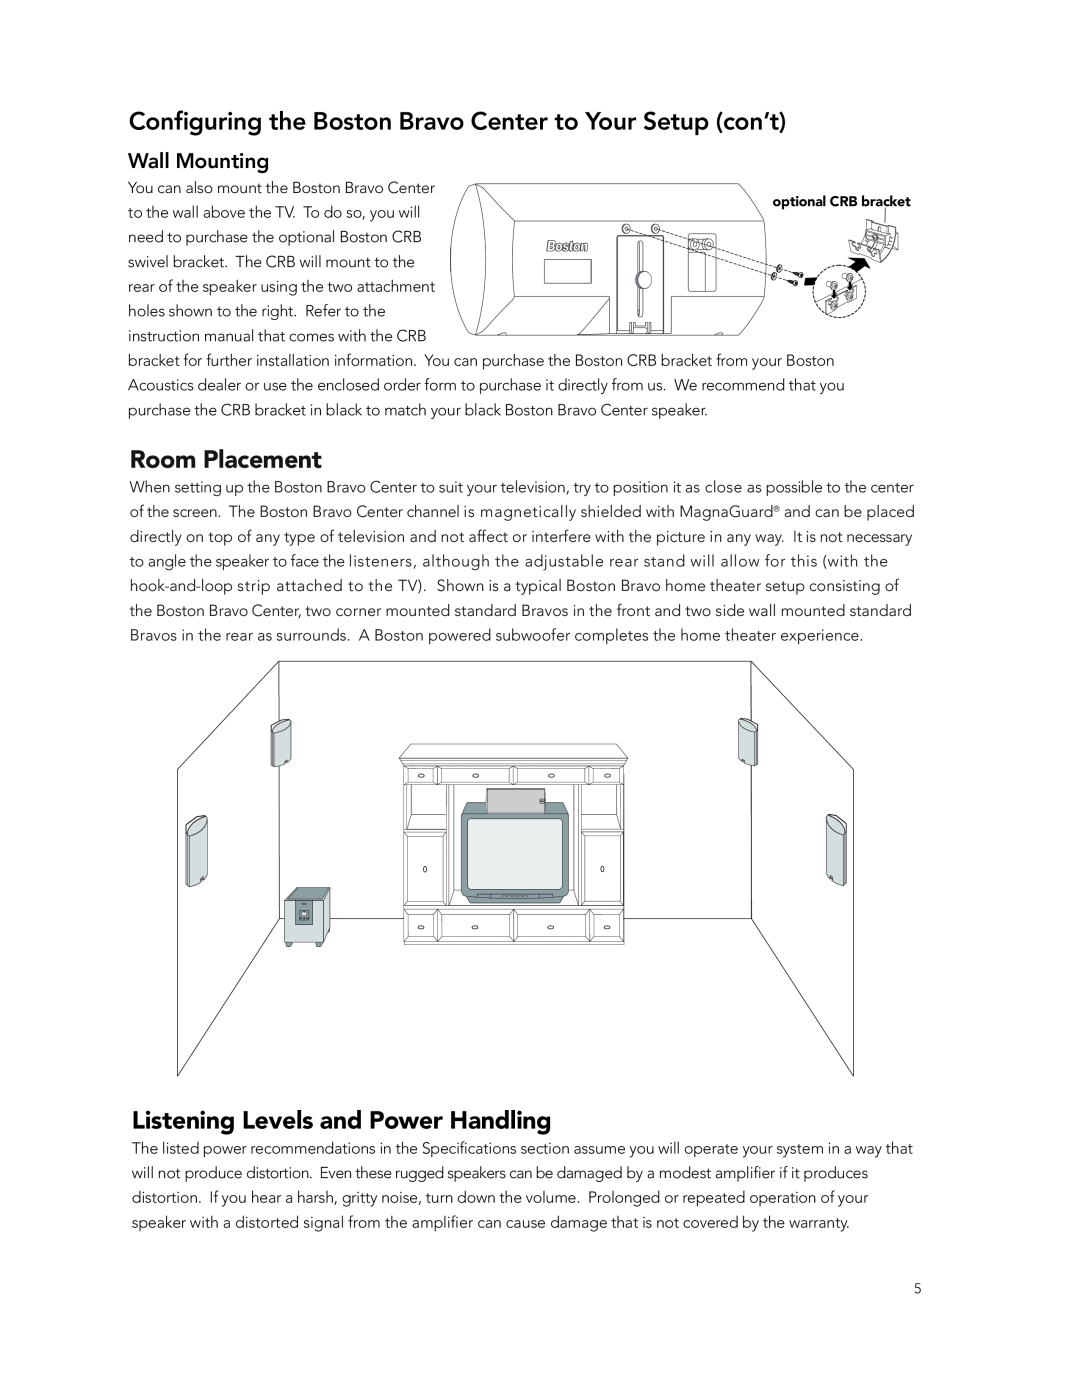 Boston Acoustics Center Channel Speaker manual Room Placement, Listening Levels and Power Handling, Wall Mounting 